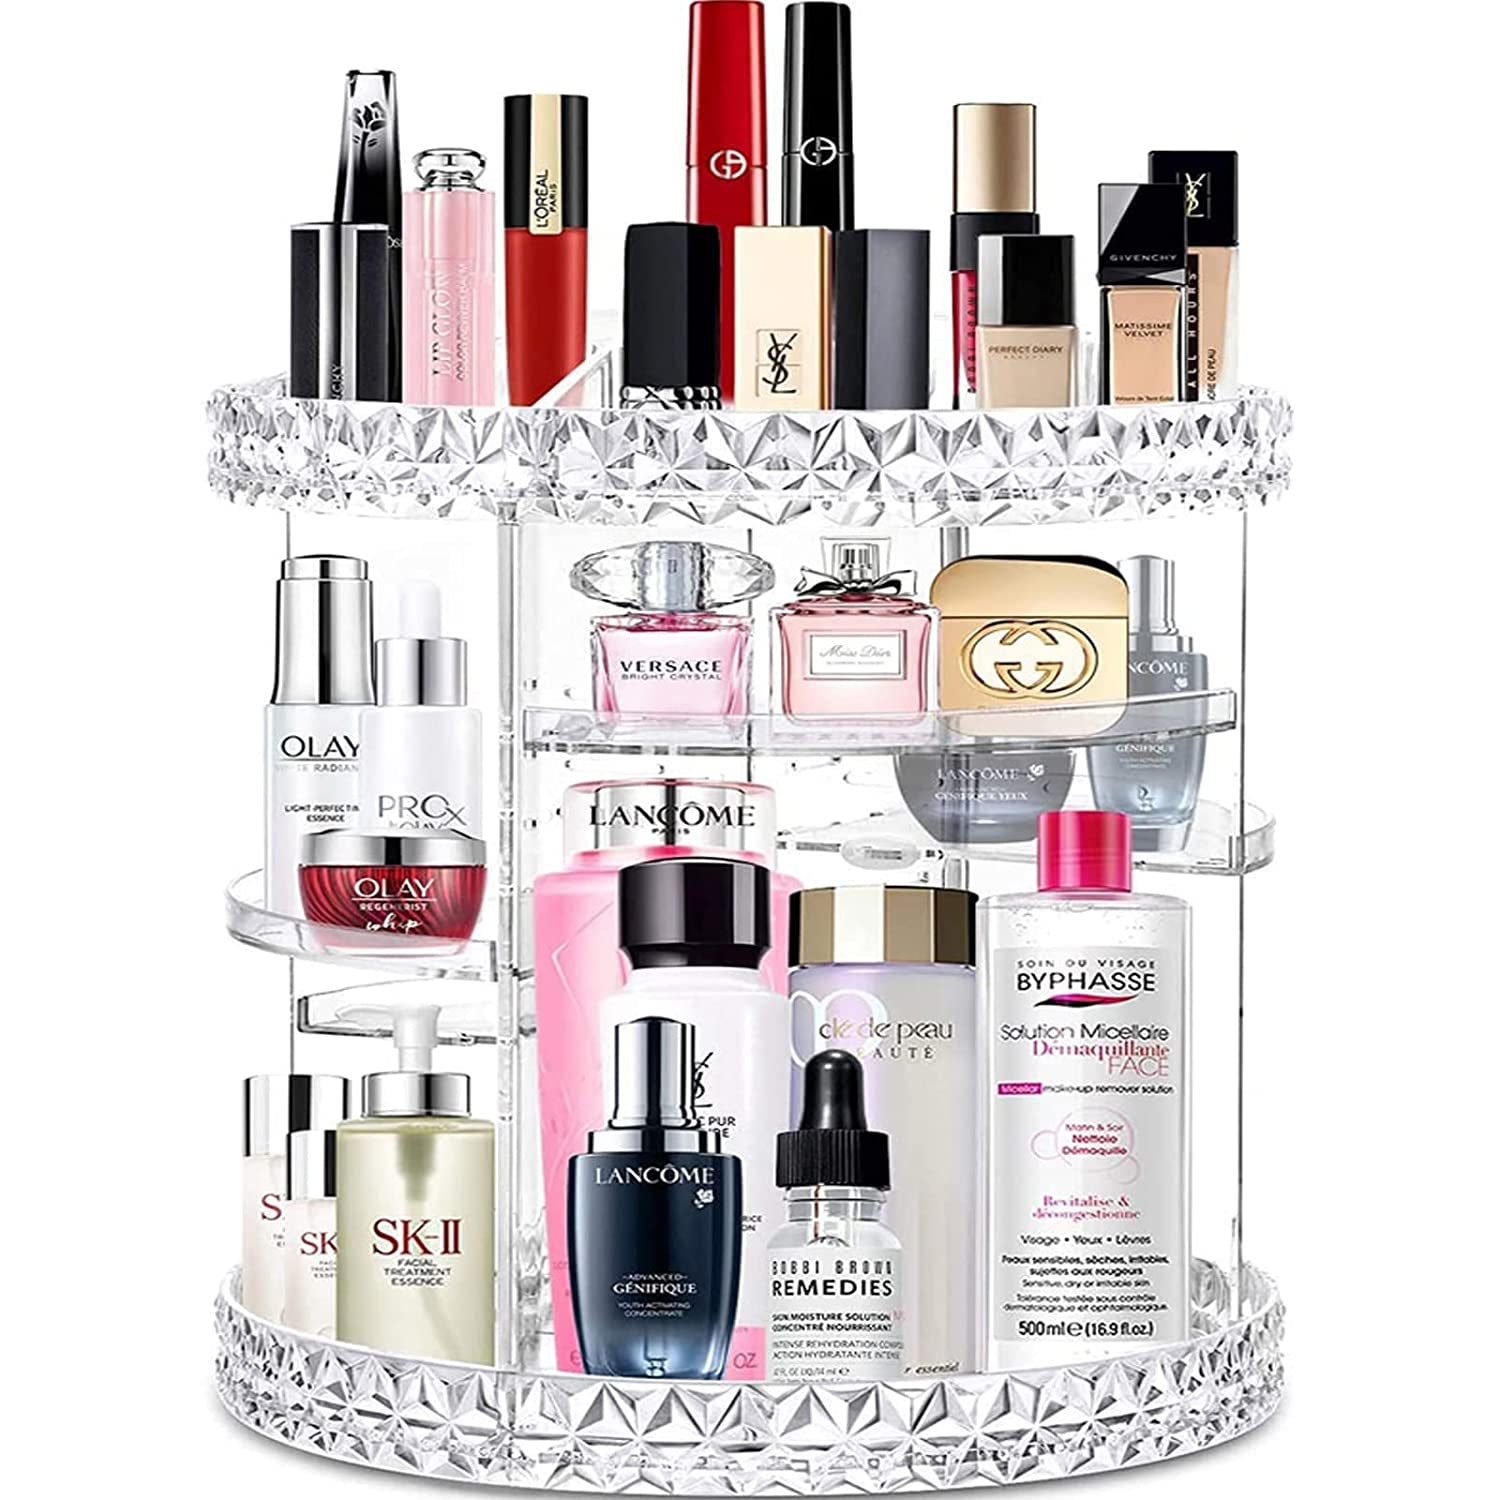 Professional Title: " 360° Rotating Cosmetic Storage Display Case - Large Capacity Acrylic Beauty Organizer with Adjustable Layers for Vanity Countertop or Bedroom Dresser - Clear Perfume and Makeup Organizer"